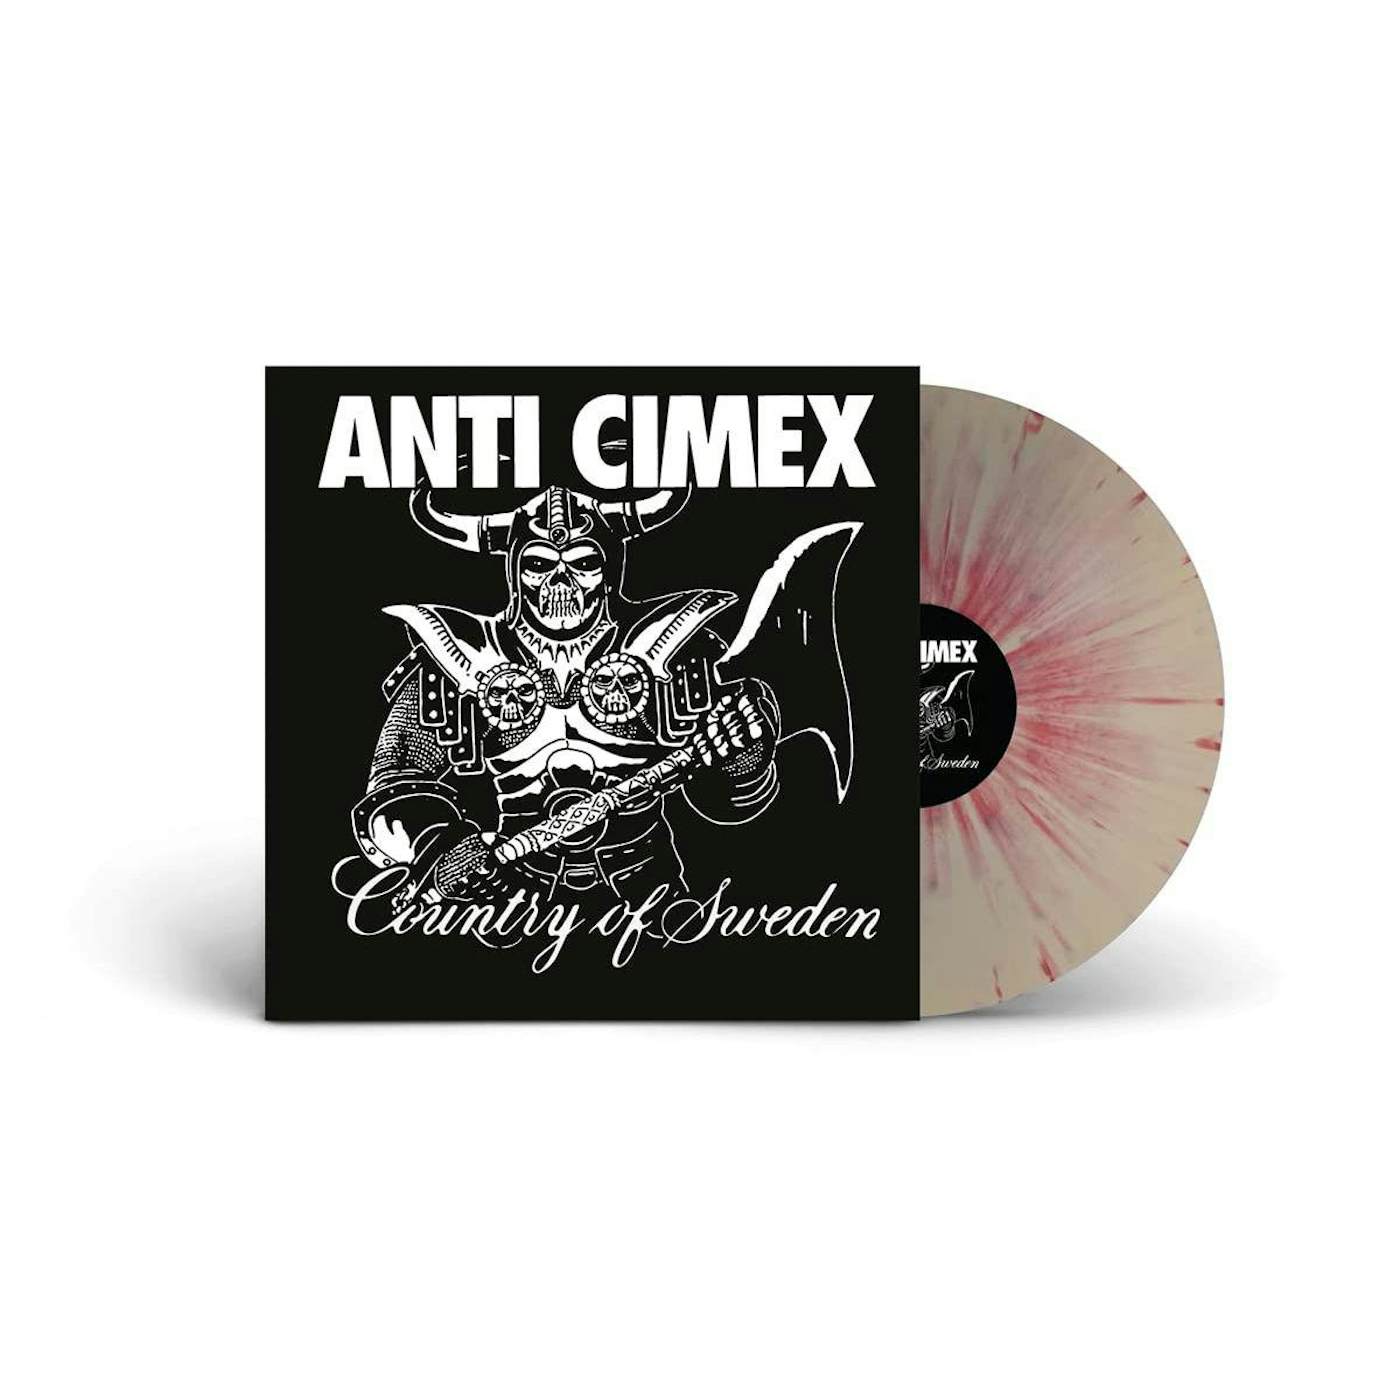 Anti Cimex Absolut Country Of Sweden (White With Red Splatter Vinyl Record/140g)